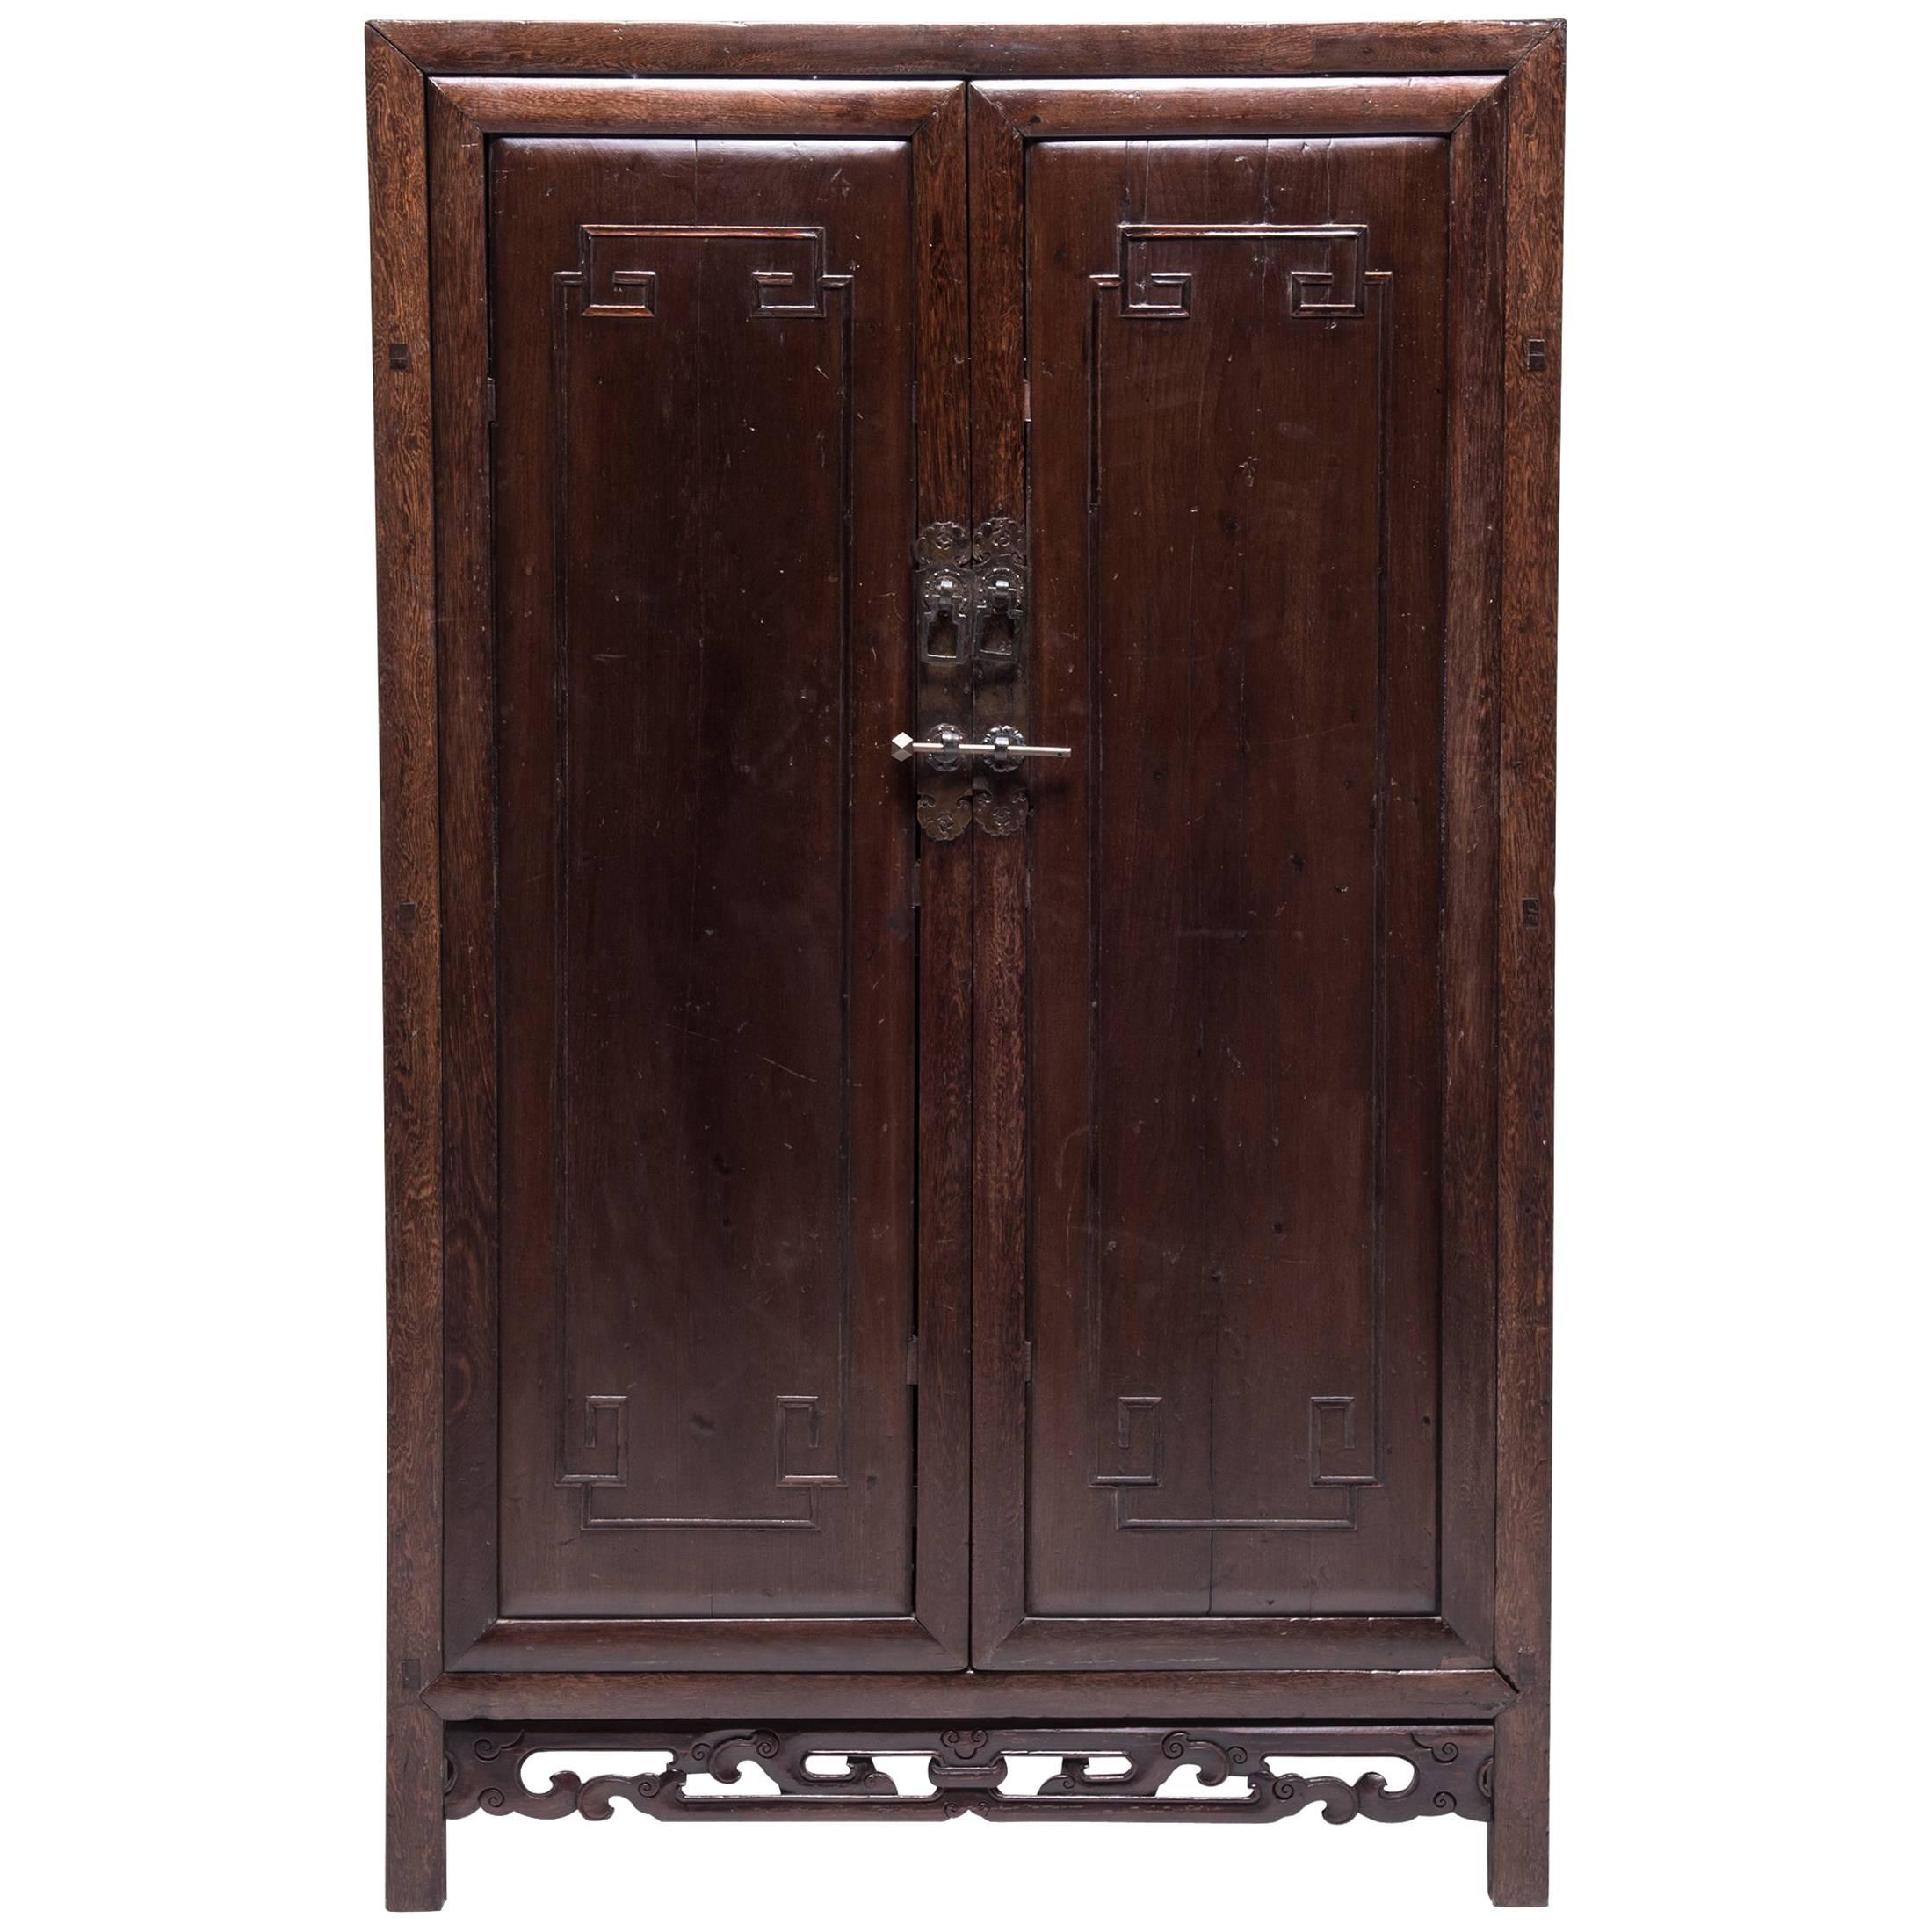 Early 19th Century Chinese Two-Door Cabinet